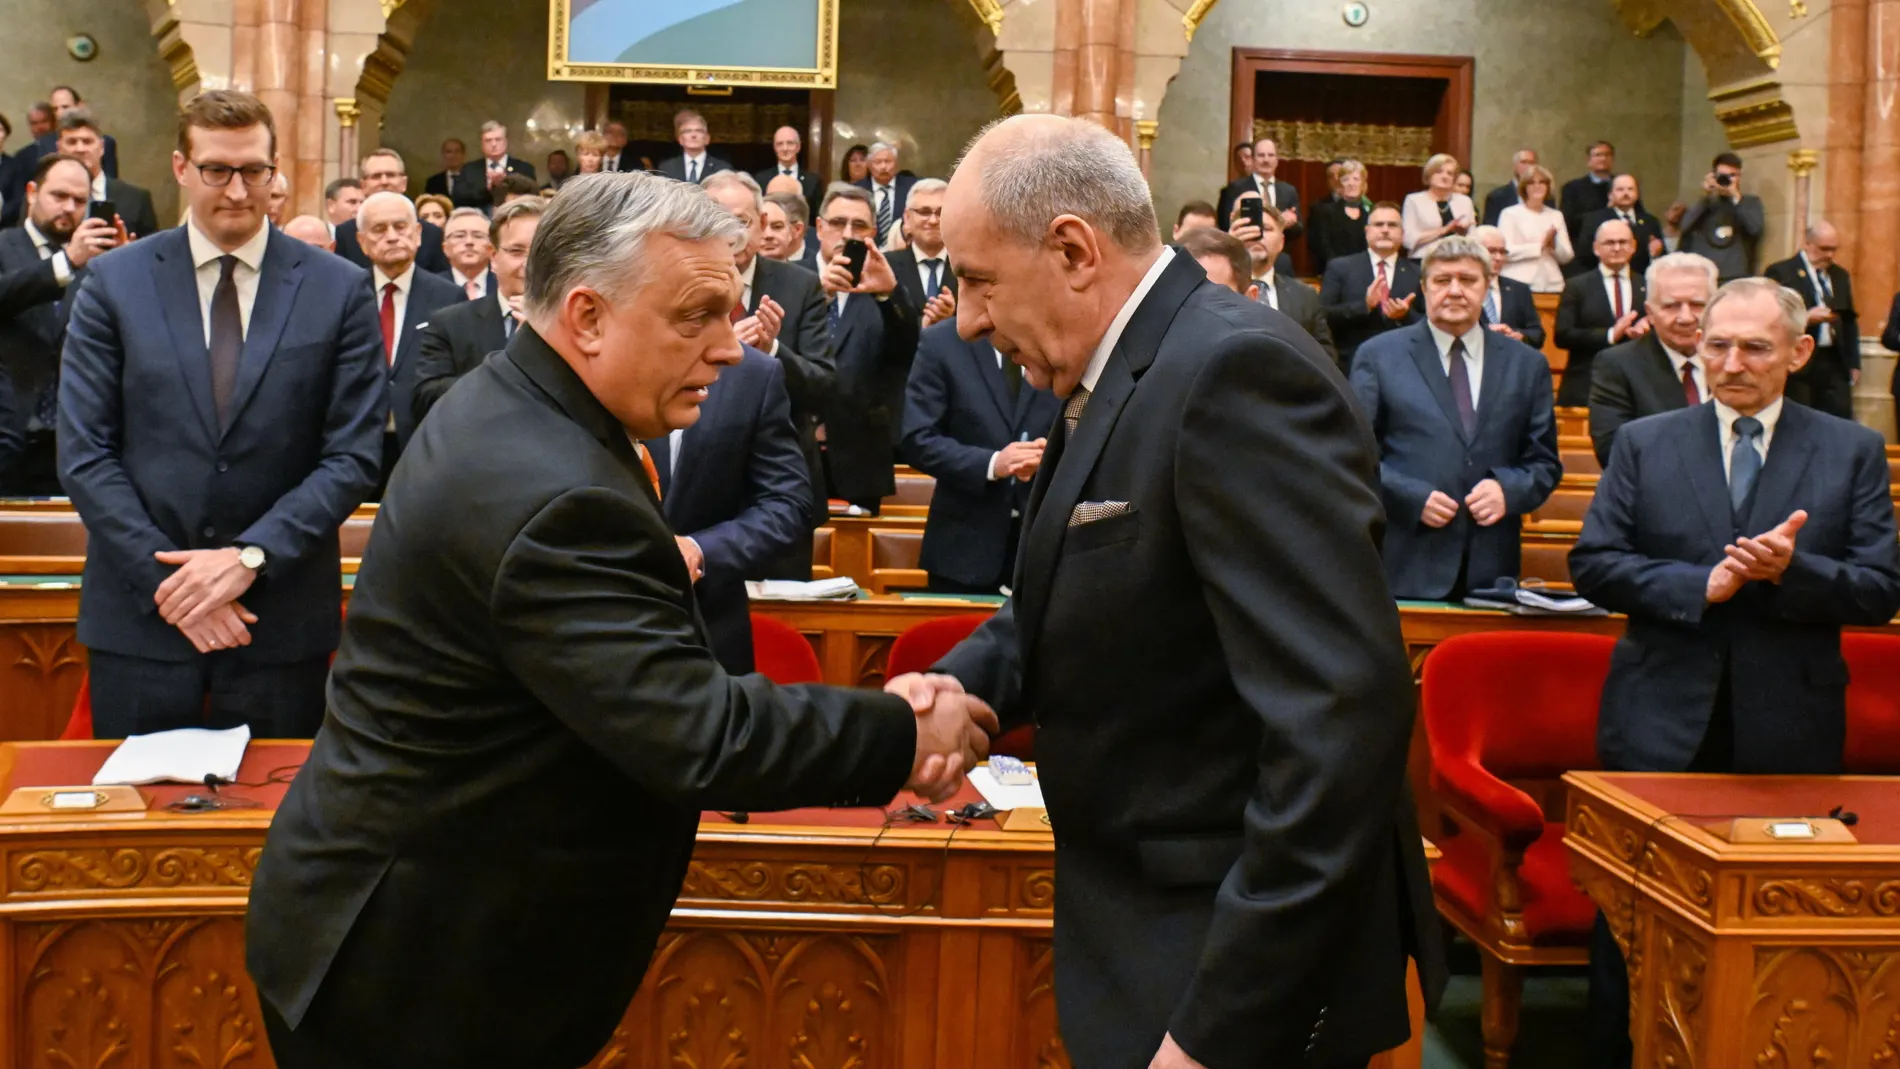 Budapest (Hungary), 26/02/2024.- Tamas Sulyok, the Fidesz-KDNP candidate for head of state, (R) is congratulated by Hungarian Prime Minister Viktor Orban after Hungarian lawmakers elected him as president during the extraordinary session of the Hungarian parliament in Budapest, Hungary, 26 February 2024. Tamas Sulyok, the outgoing head of the Constitutional Court, was the sole candidate for the post, received 134 votes of 139 valid ballots, with 5 lawmakers voting against him in a secret ball...